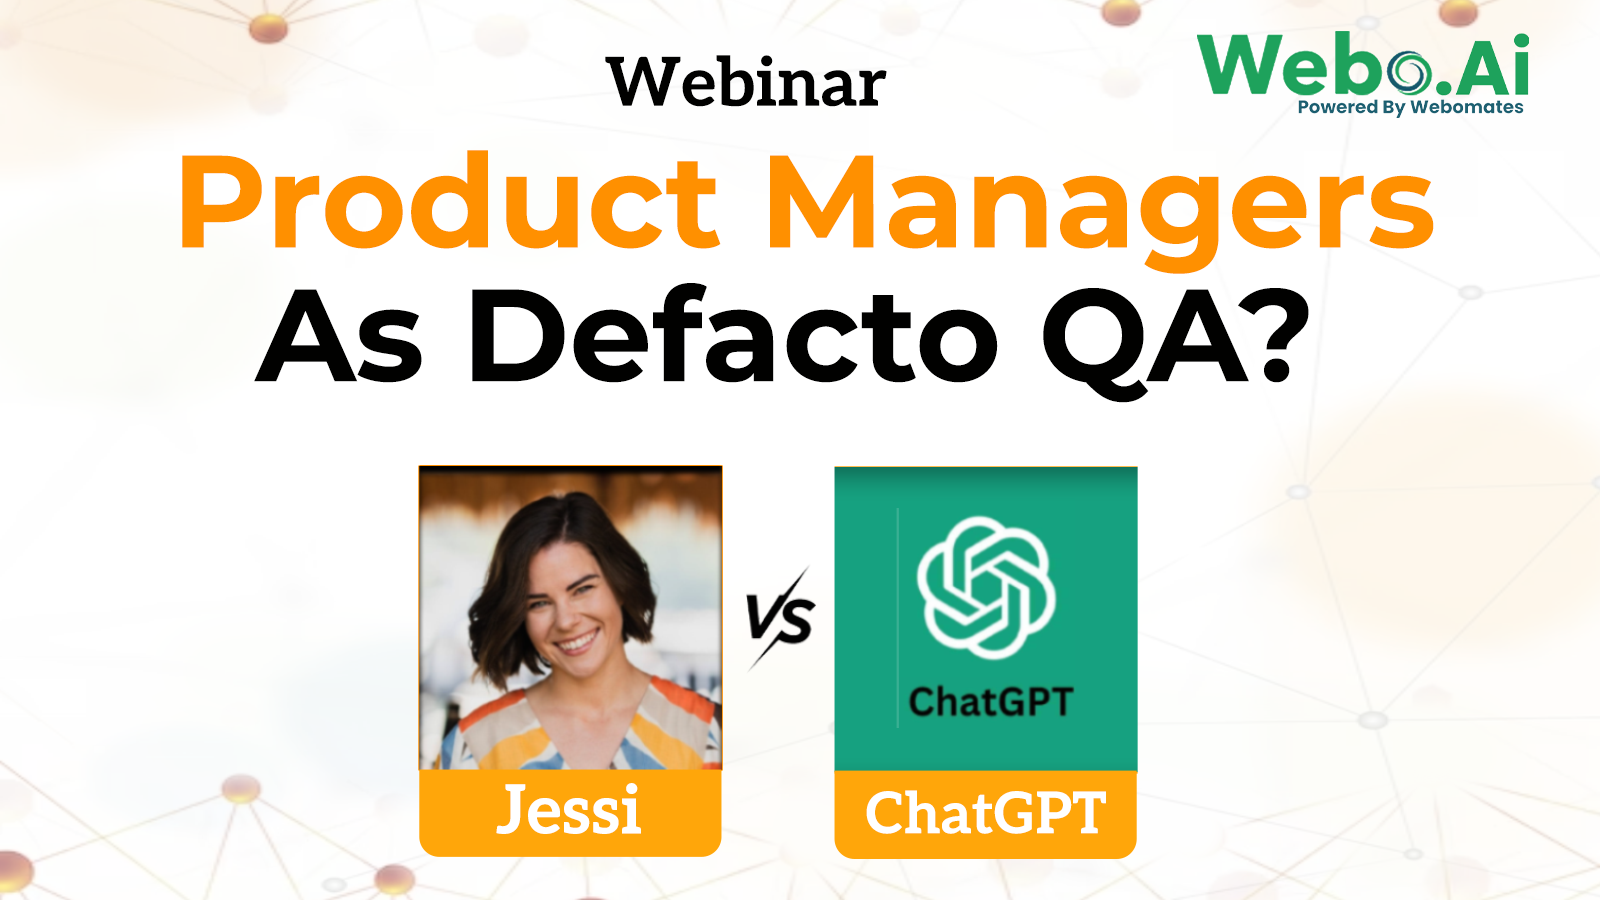 Product Managers As Defacto QA?